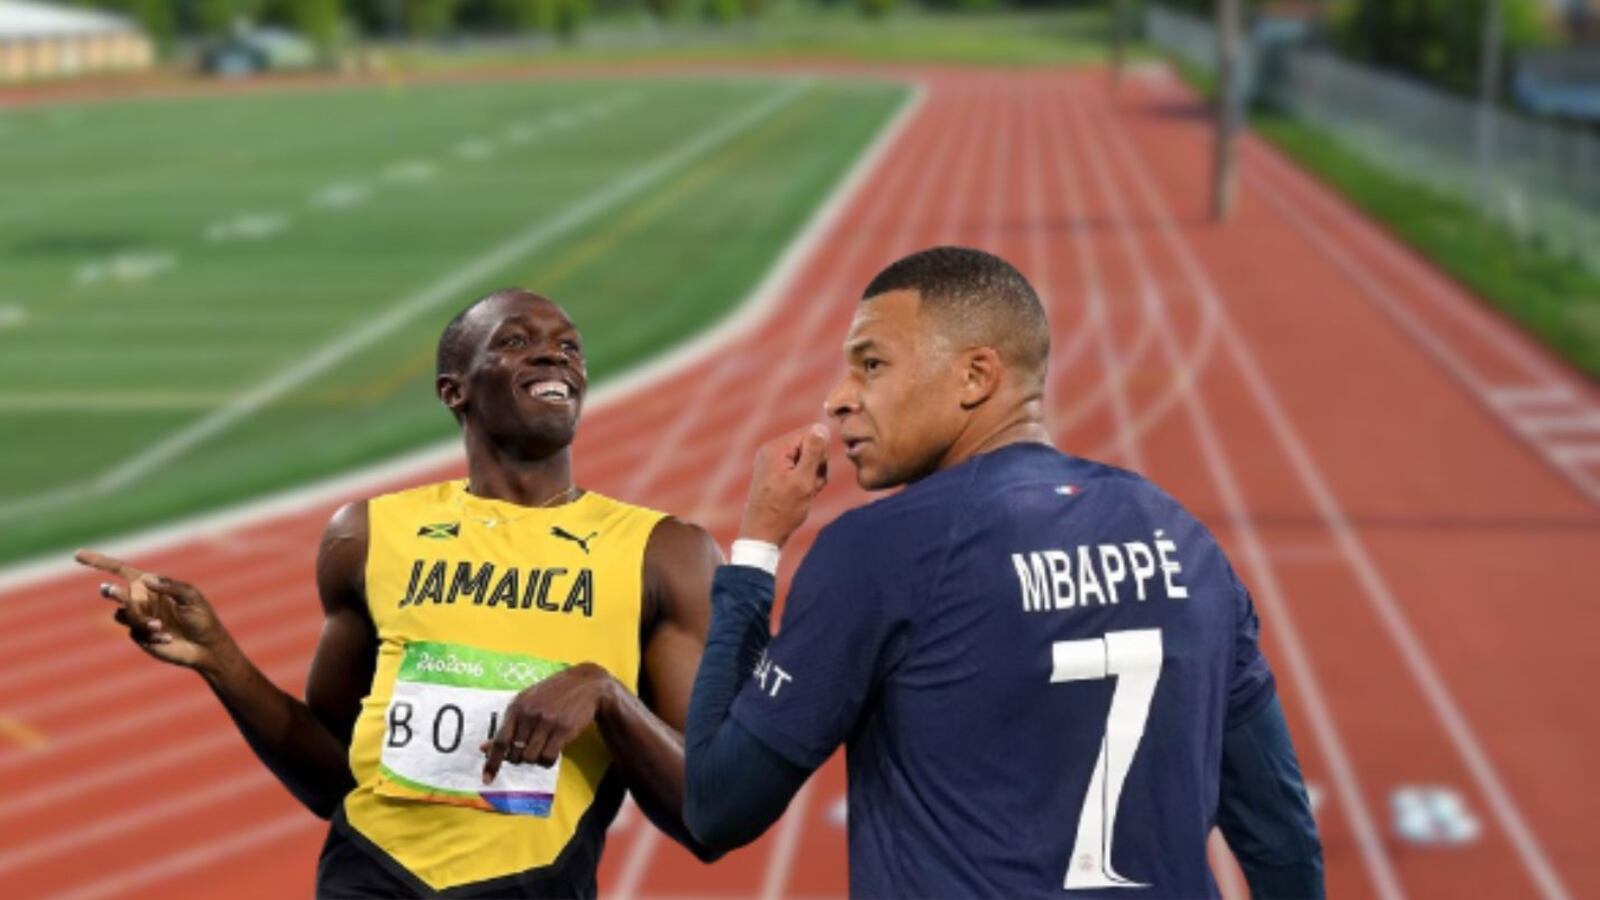 (VIDEO) Usain Bolt was asked if he could beat Mbappé on a 100m race and his answer shock everyone